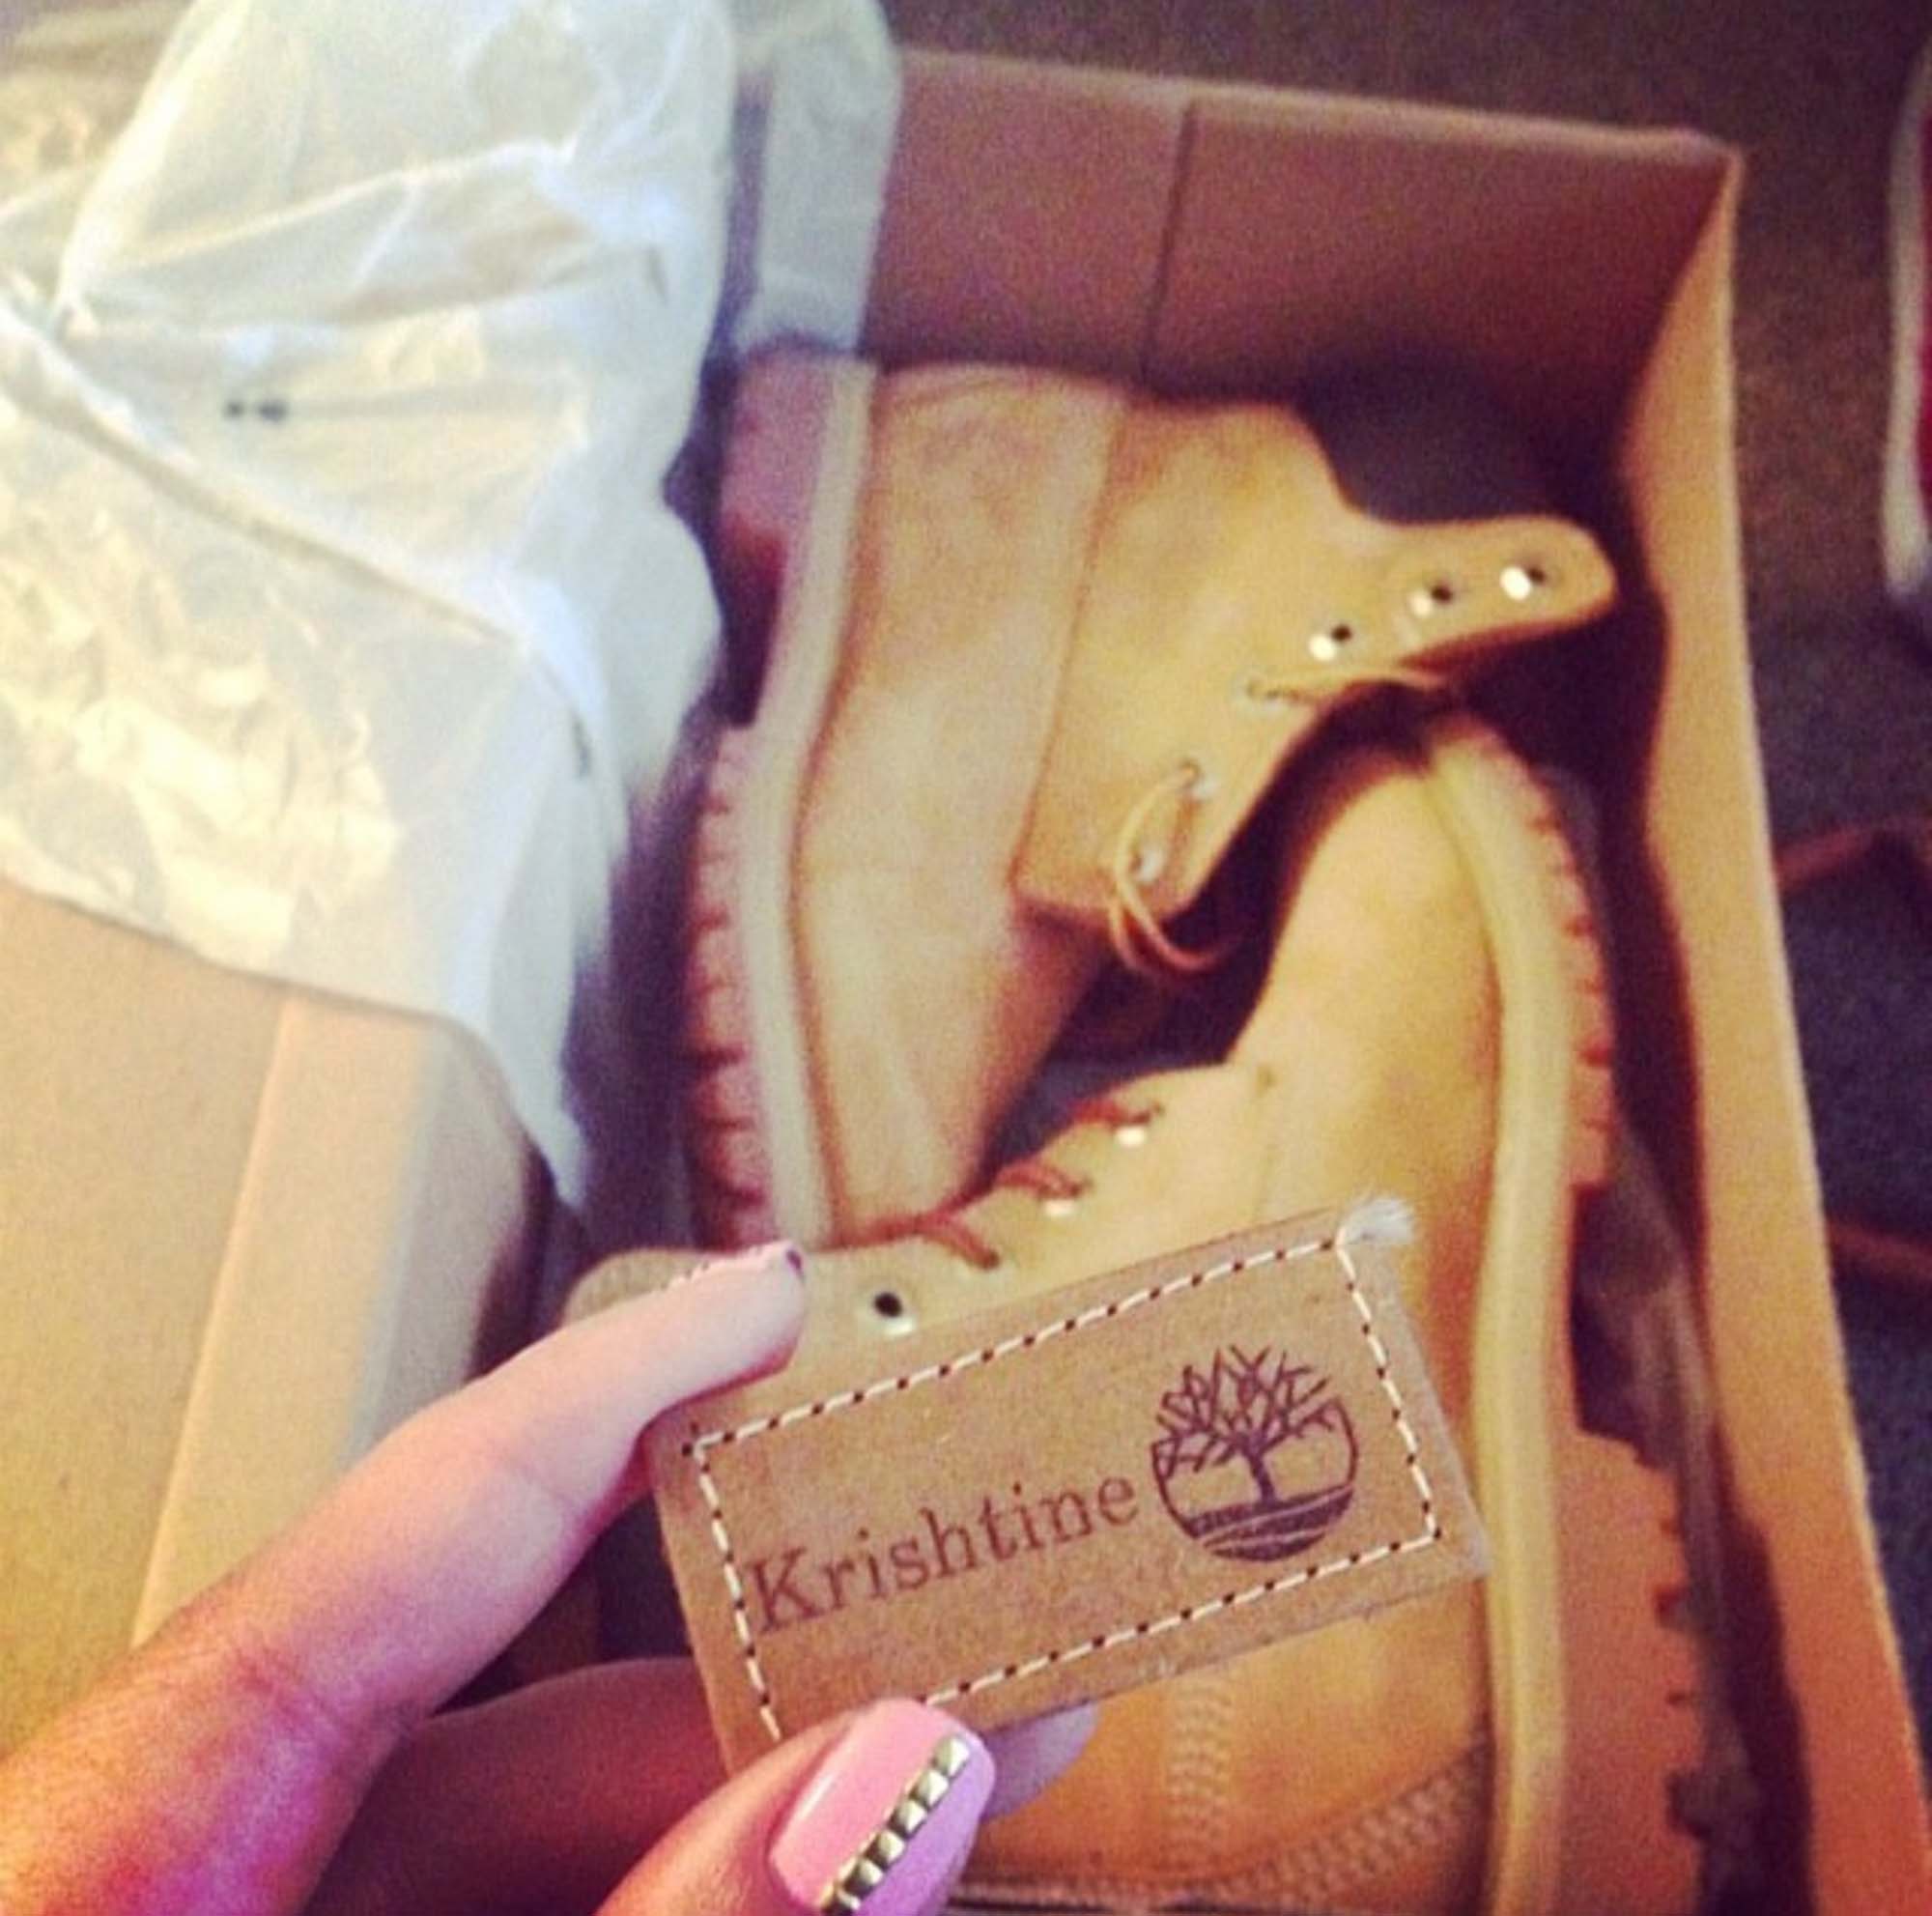 Over a box a Timberland boots, a hand holds up an engraved leather name tag that reads "Krishtine"